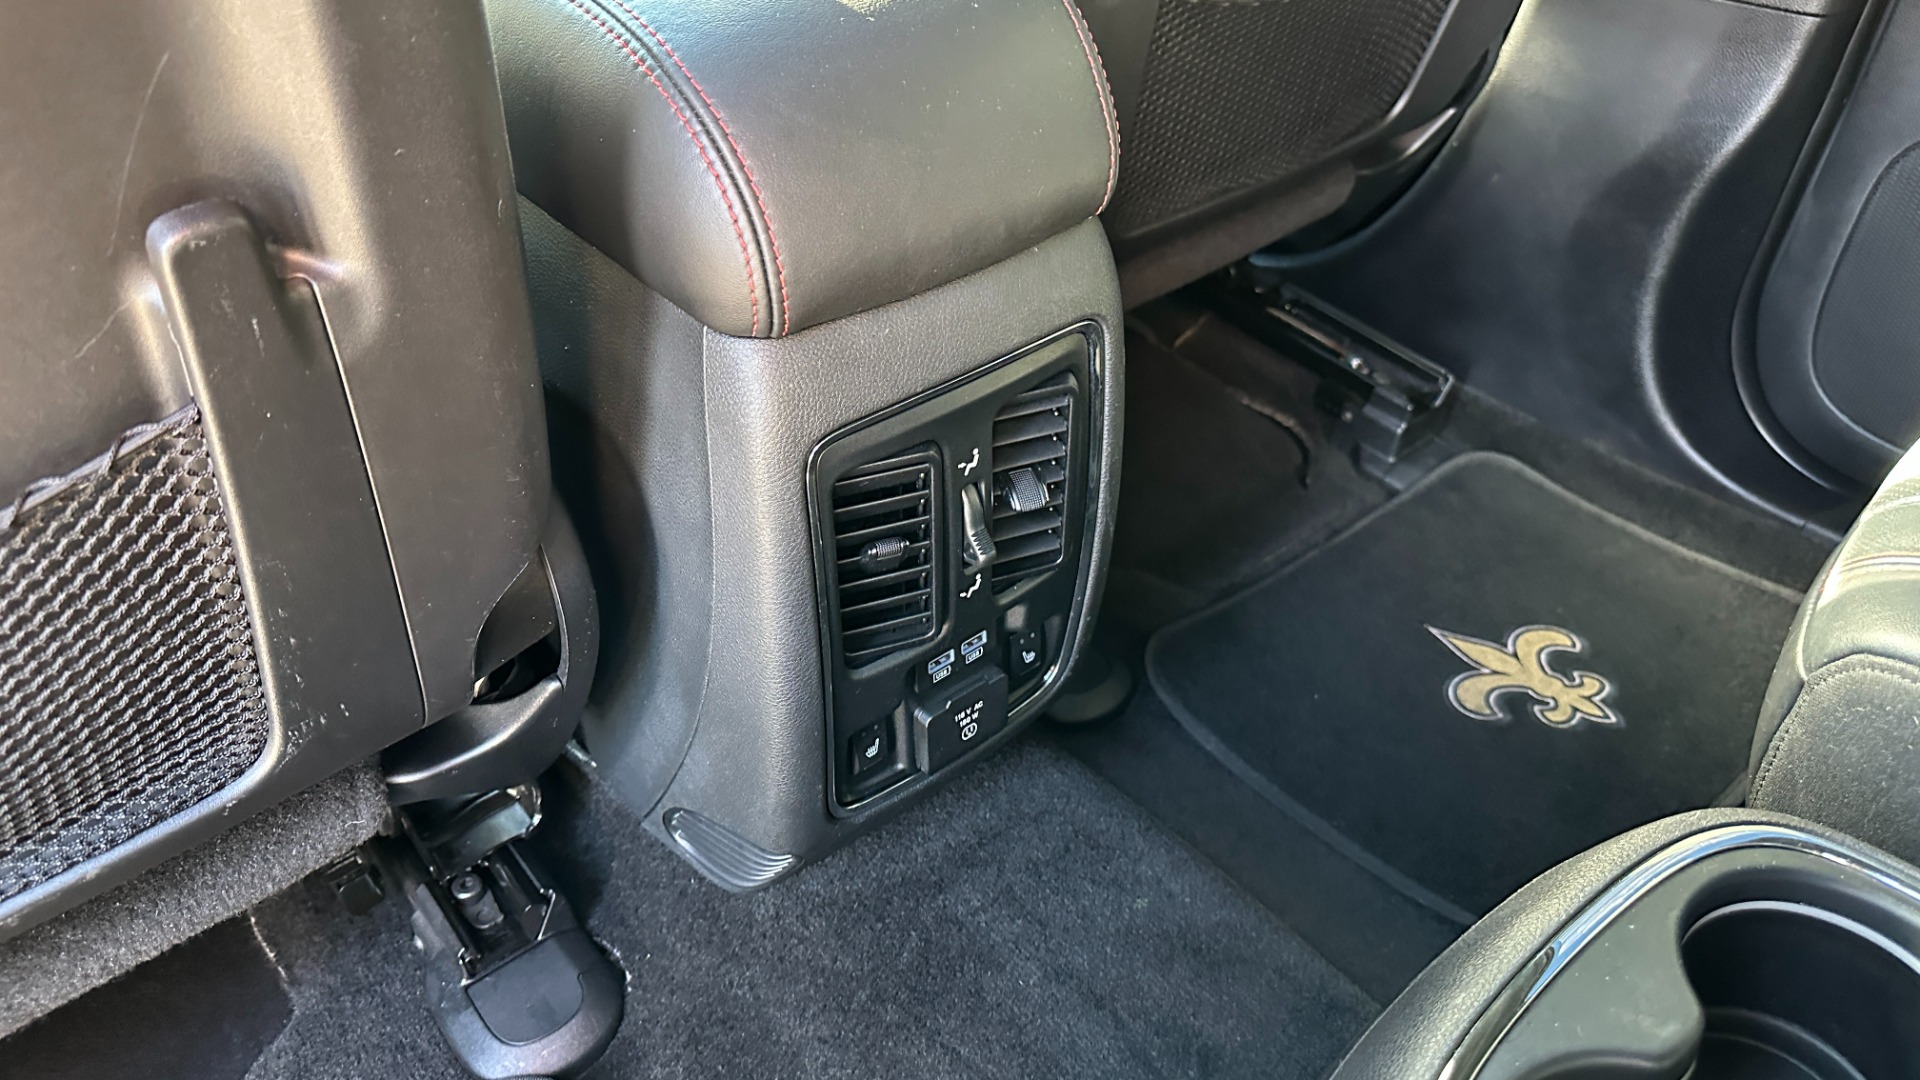 Used 2015 Dodge Durango R/T / HEMI V8 / CAPTAINS CHAIRS / 3 ROW SEATING / TECH PKG / NAPPA LEATHER  for sale Sold at Formula Imports in Charlotte NC 28227 29